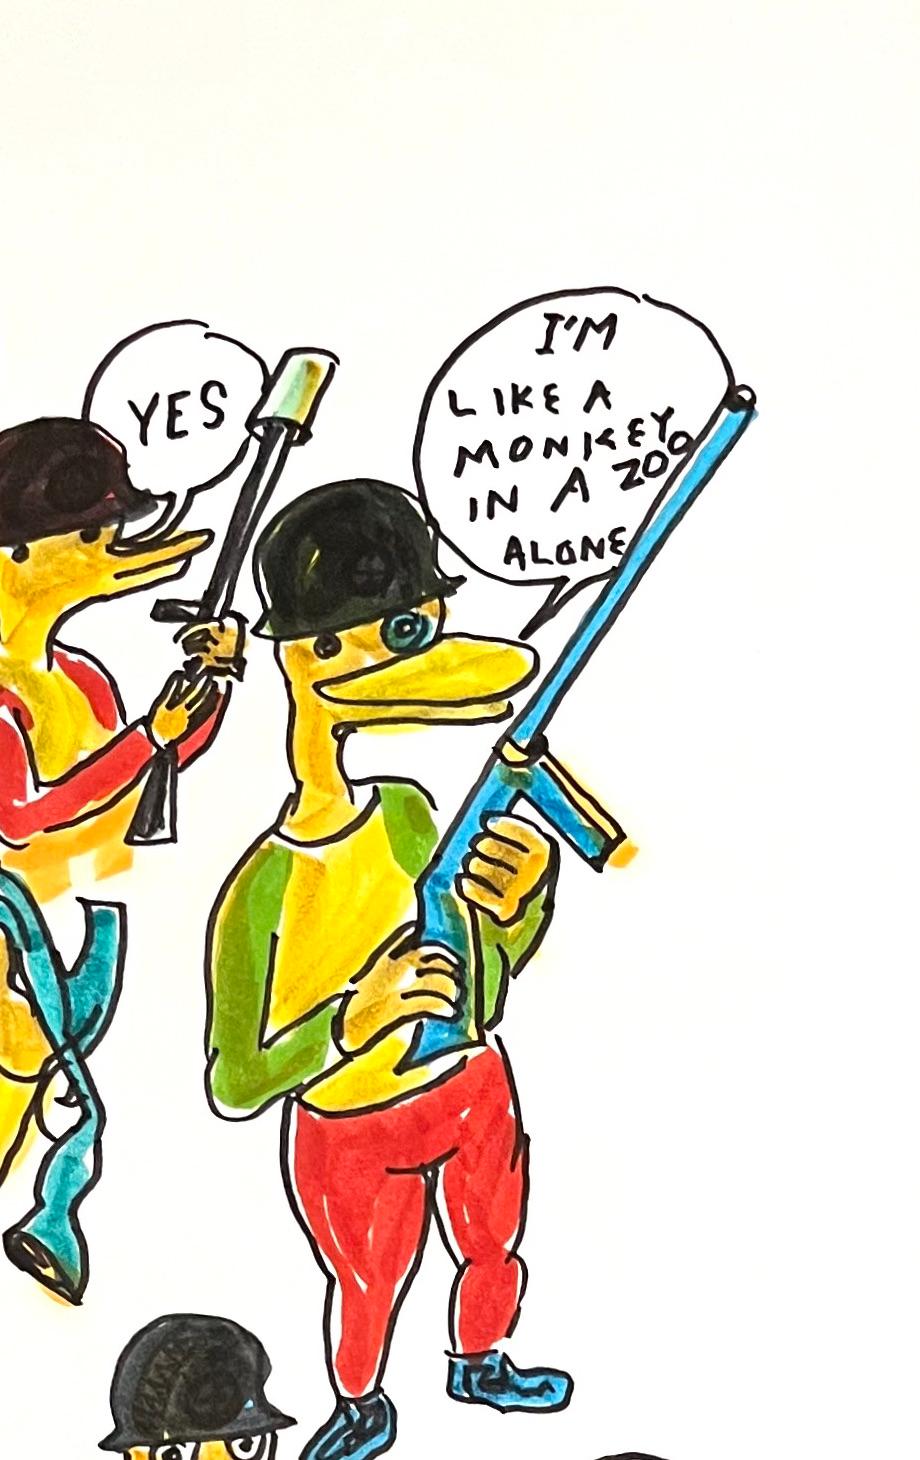 Golly There No End to War Before - Colorful Figurative Drawing, Duck Wars Series - Folk Art Art by Daniel Johnston